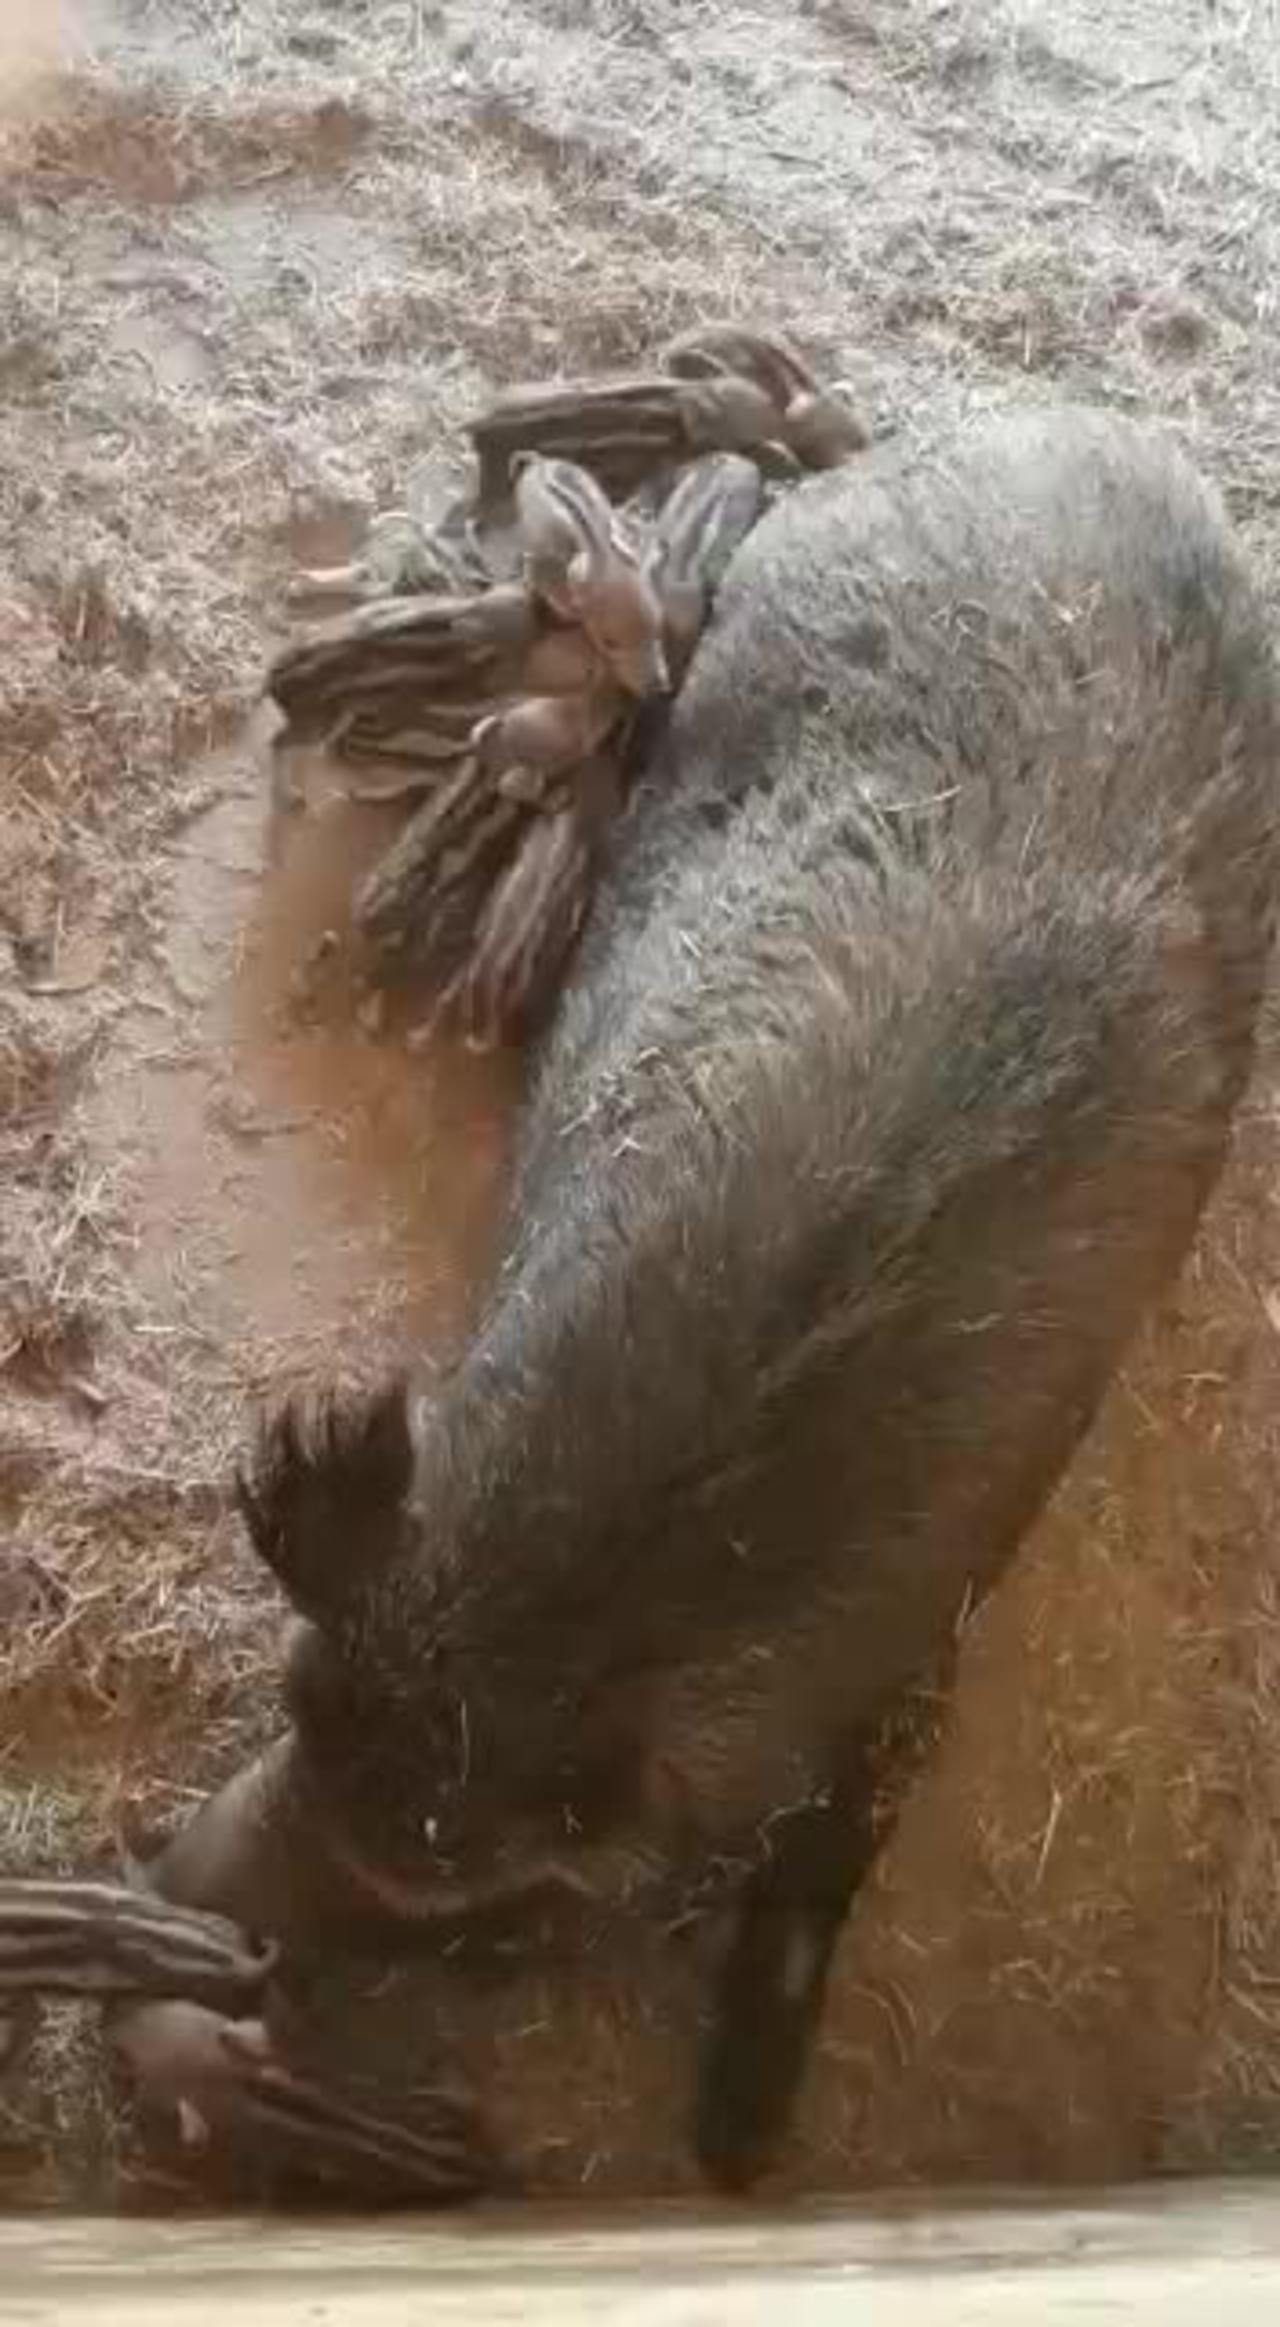 Cute baby piglets drink from mom. Cute animal babies videos. Wild Boar . Baby animals